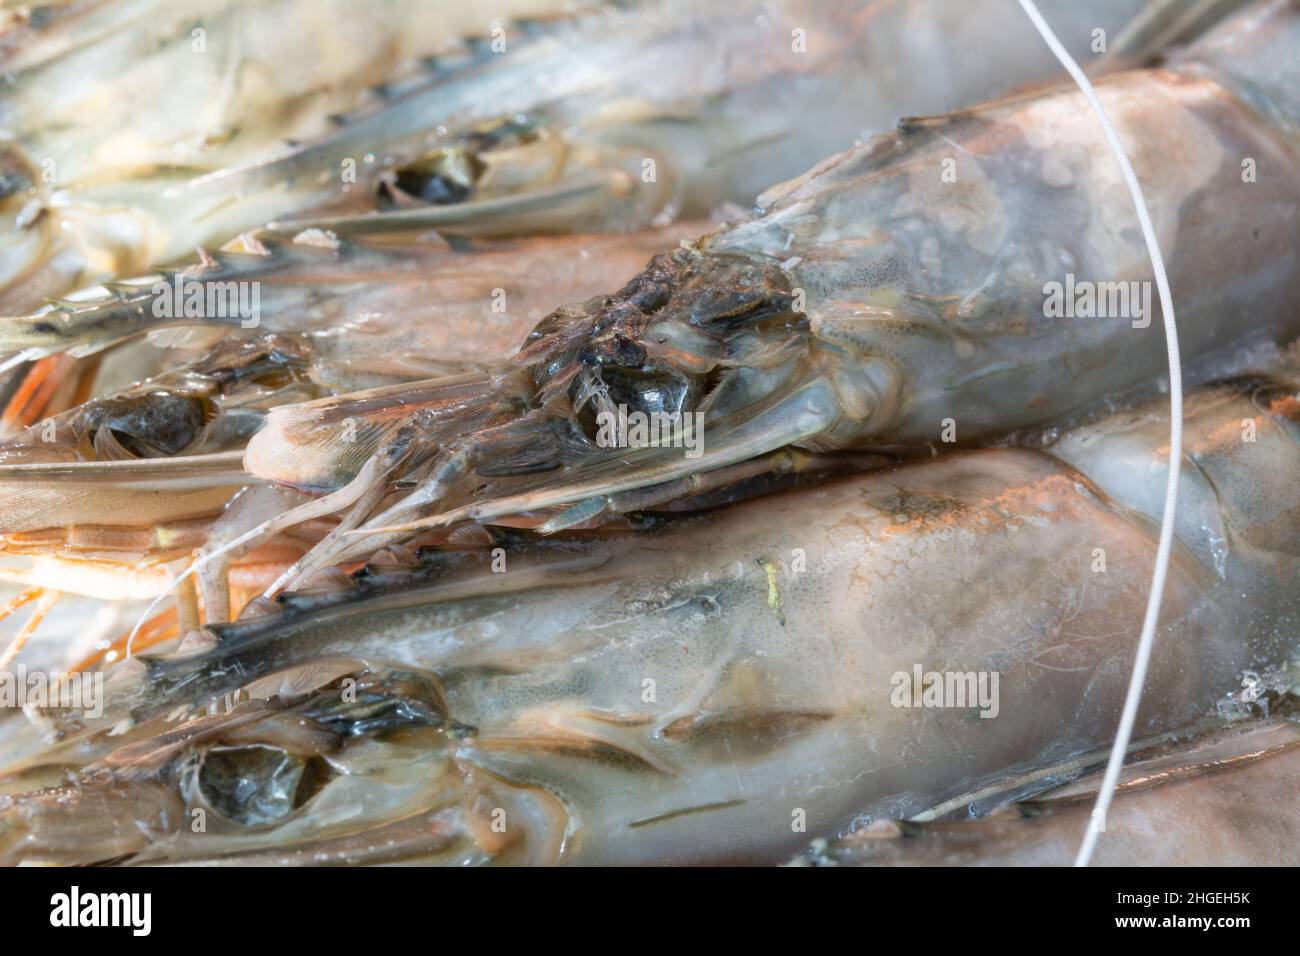 Tiger chrimp. Unpeeled frozen tiger prawns, close-up, selective focus, shallow depth of field. Stock Photo